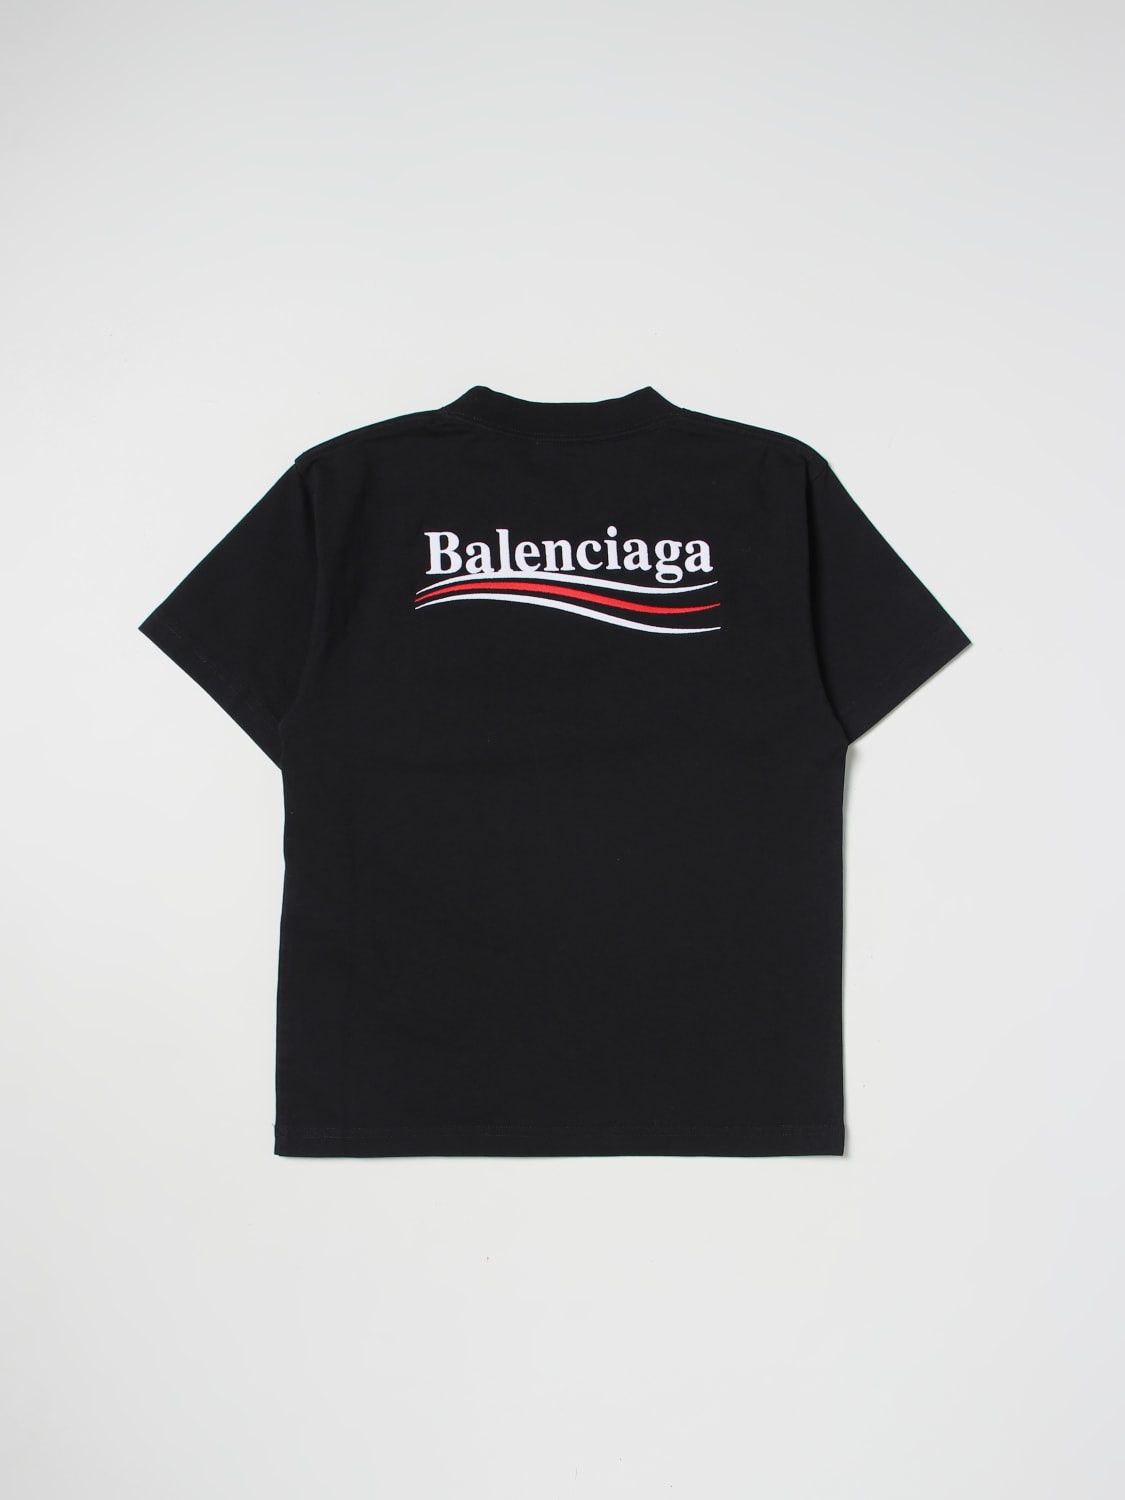 optie Hover Staat BALENCIAGA: cotton t-shirt with Political Campaign logo - Black | Balenciaga  t-shirt 681864TMVE7 online on GIGLIO.COM